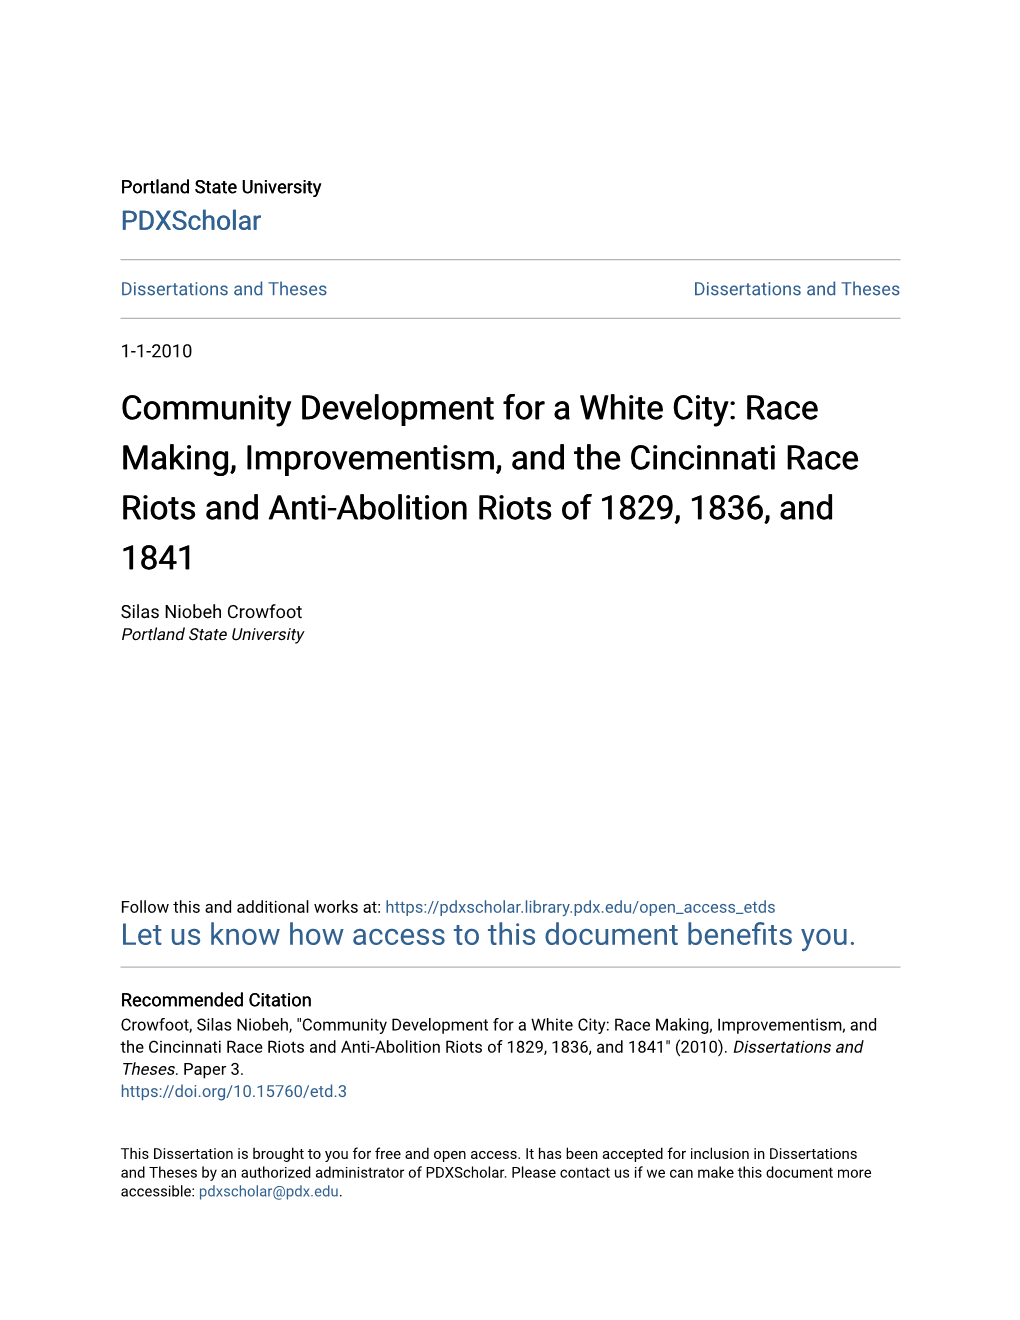 Race Making, Improvementism, and the Cincinnati Race Riots and Anti-Abolition Riots of 1829, 1836, and 1841